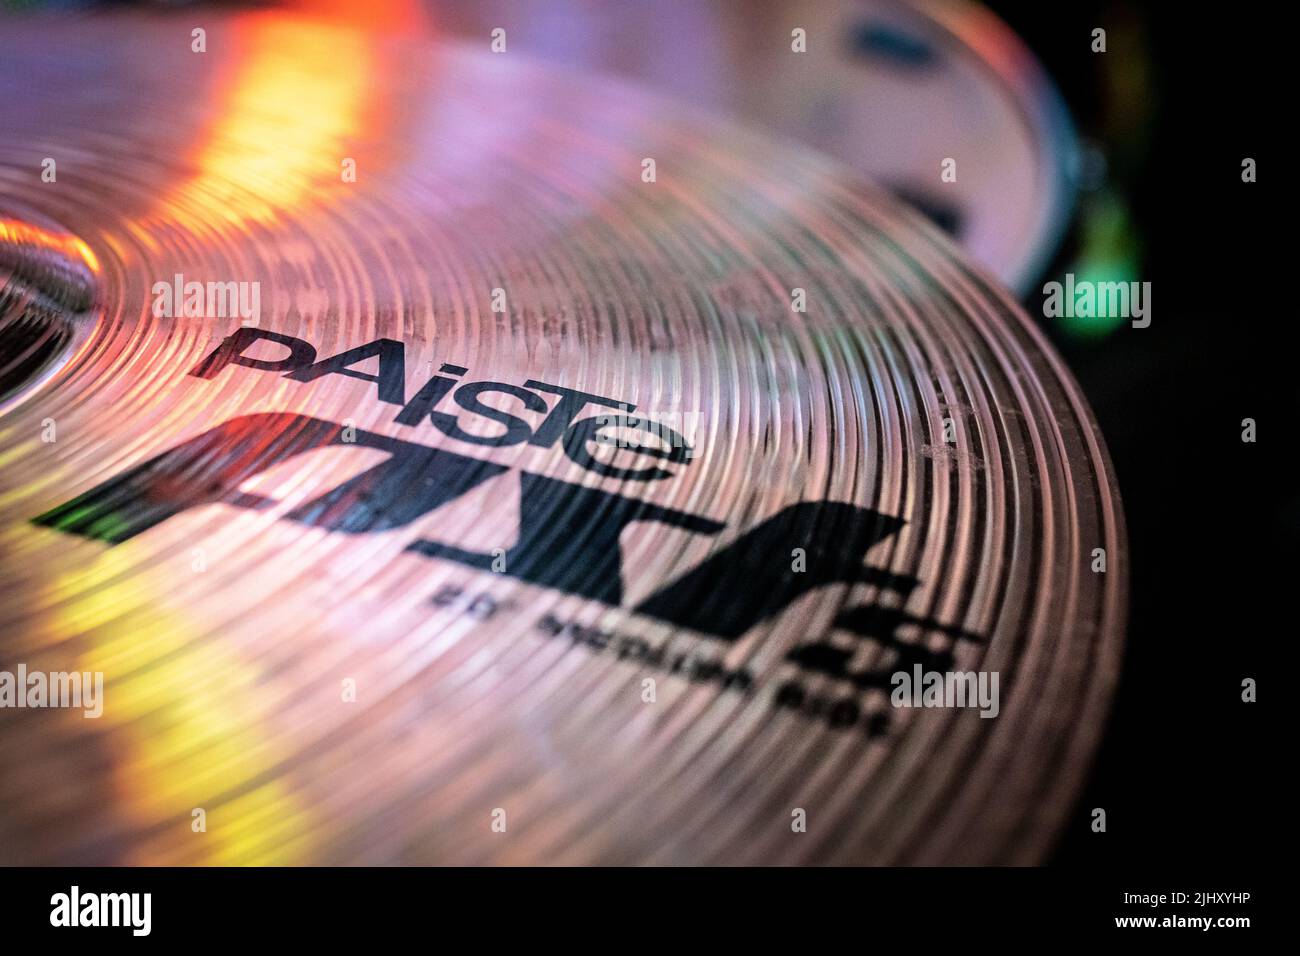 Paiste pst 5 close-up logo on ride cymbal on the drum set Stock Photo